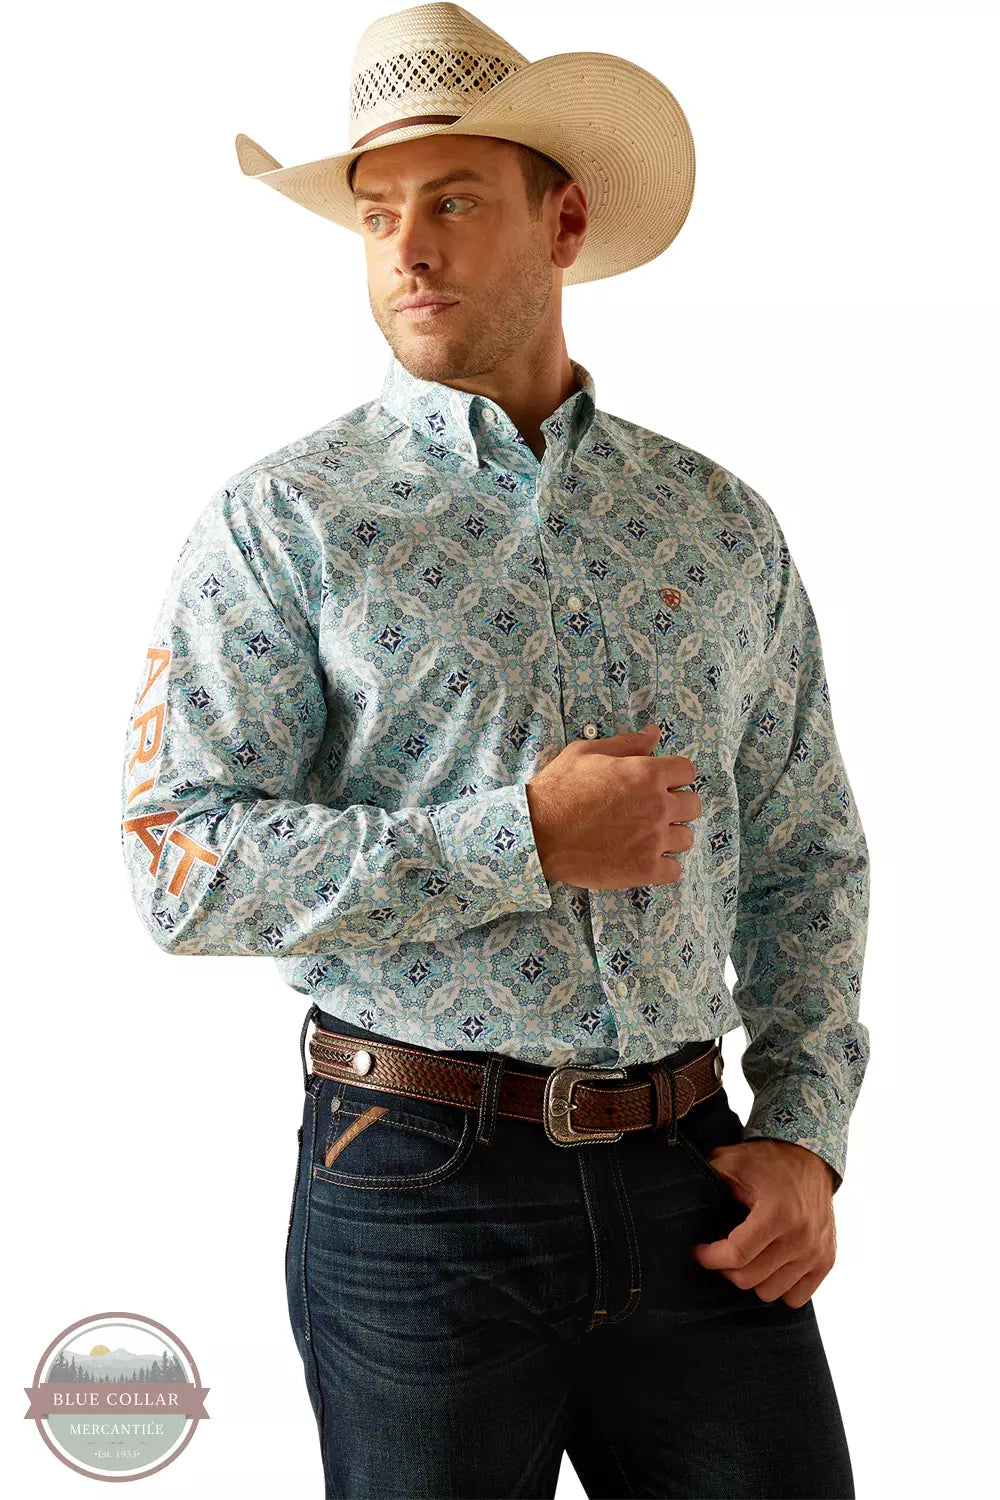 Ariat 10050533 Team Emmett Classic Fit Long Sleeve Shirt in a White & Turquoise Print Front View